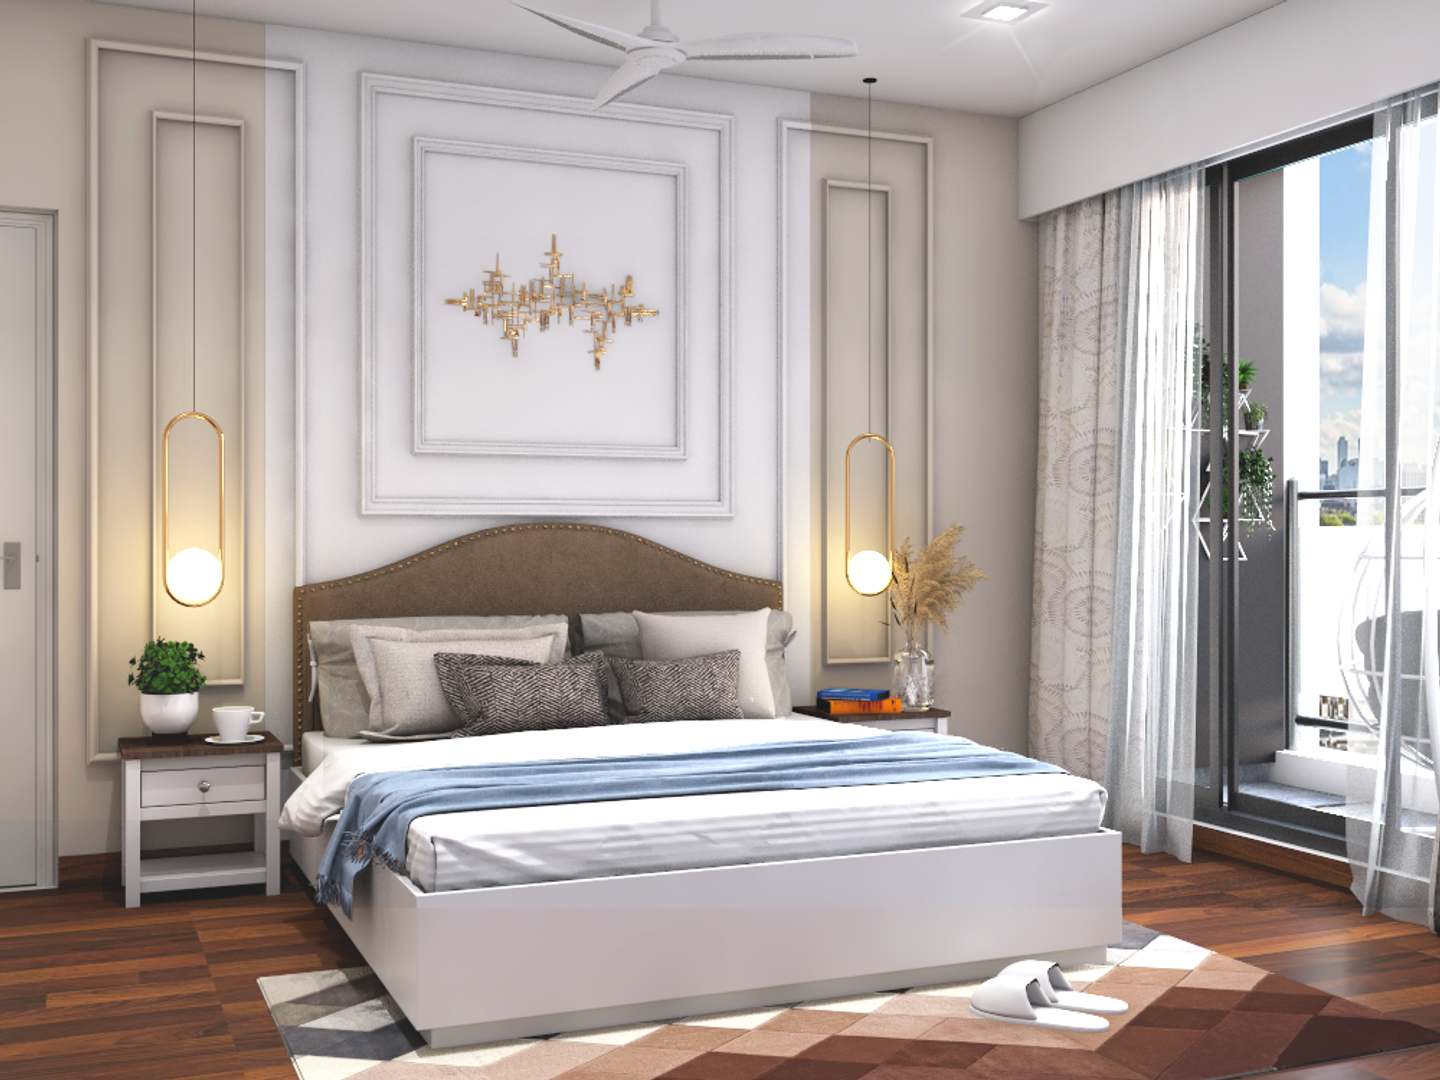 Traditional Bedroom with Golden Trims - Livspace